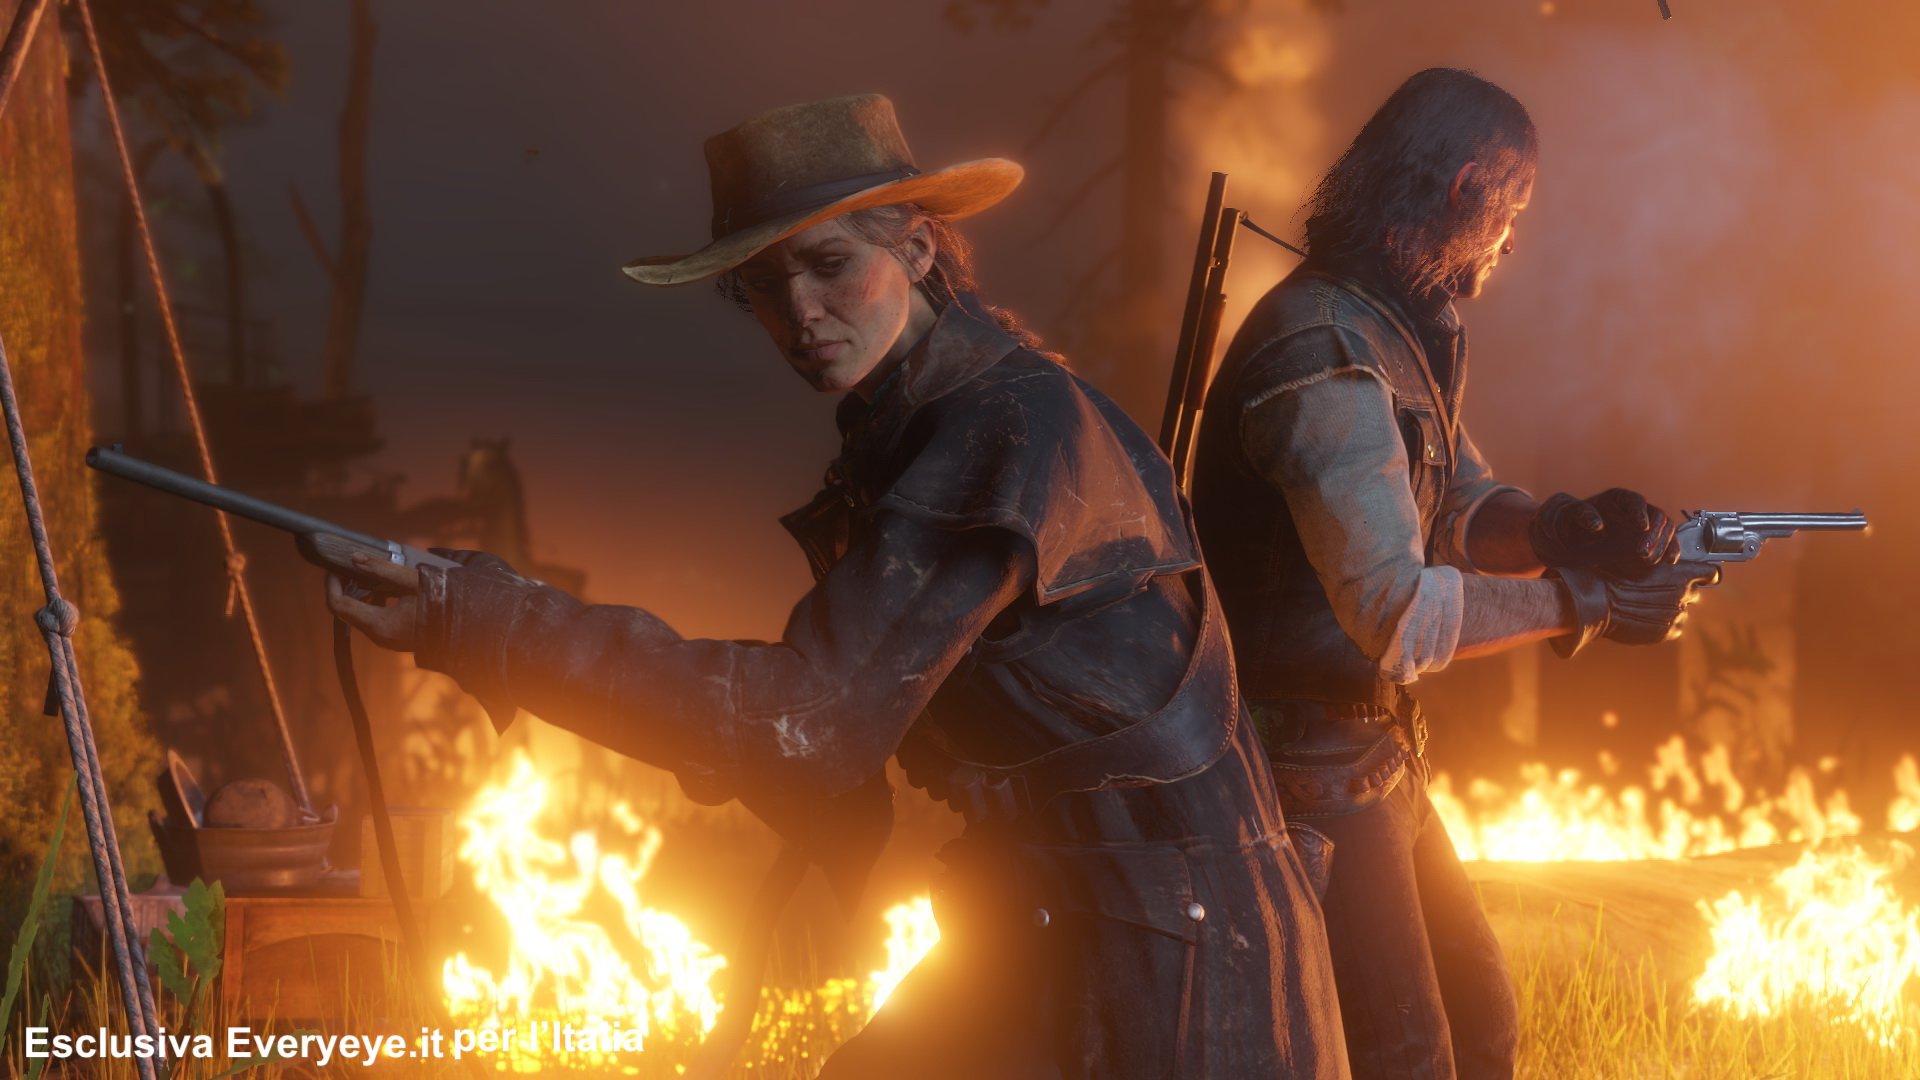 Theory: The official Red Dead Redemption 2 screenshots confirm that